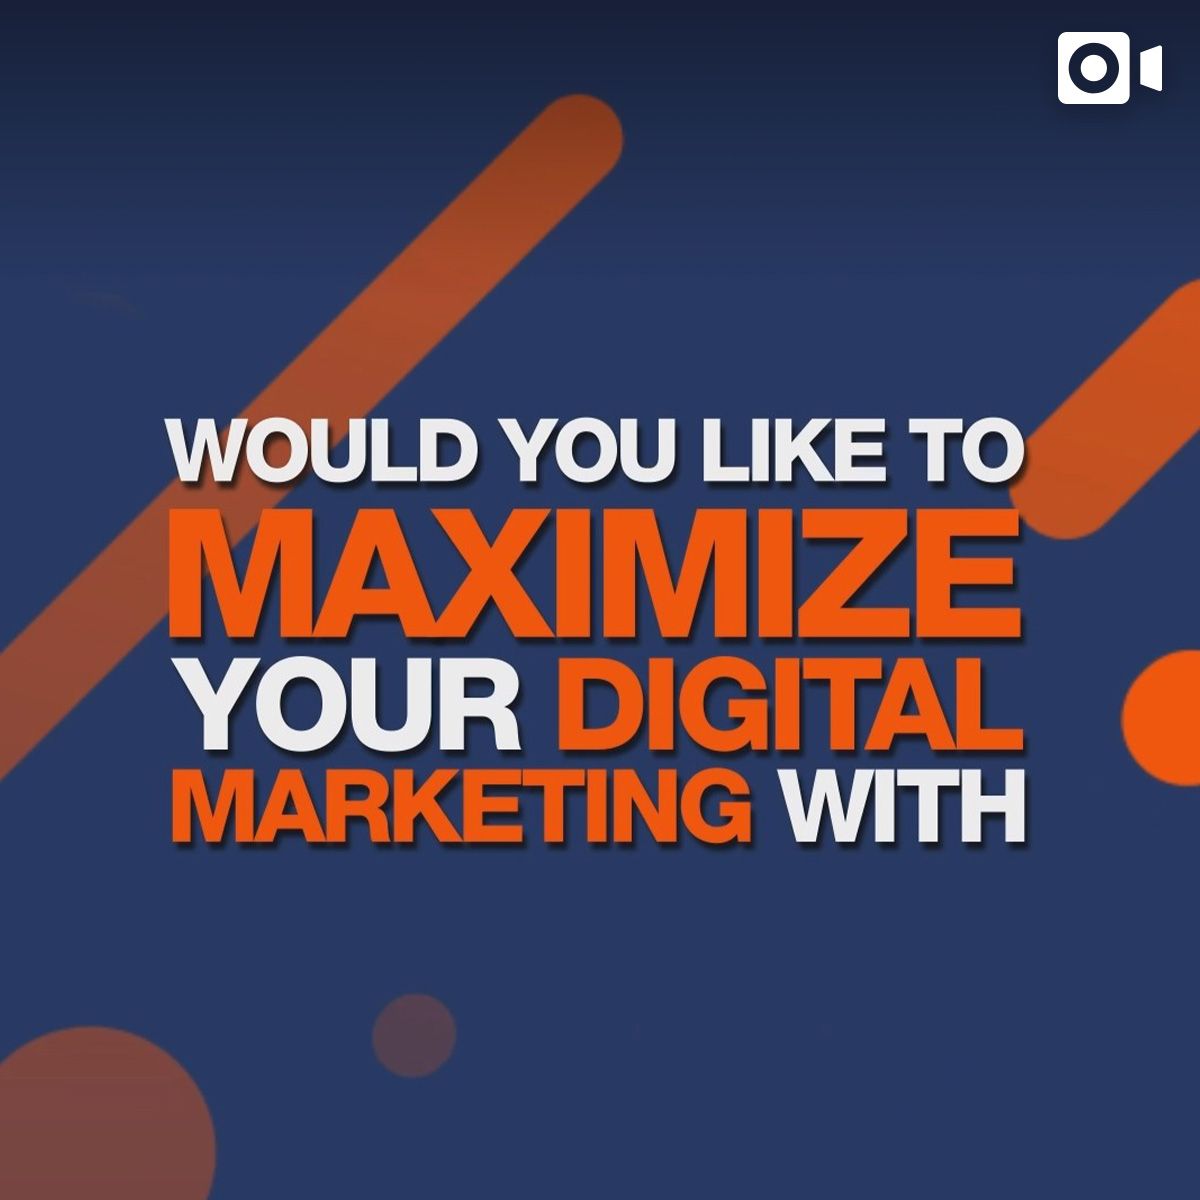 Would you like to maximize your digital marketing with...